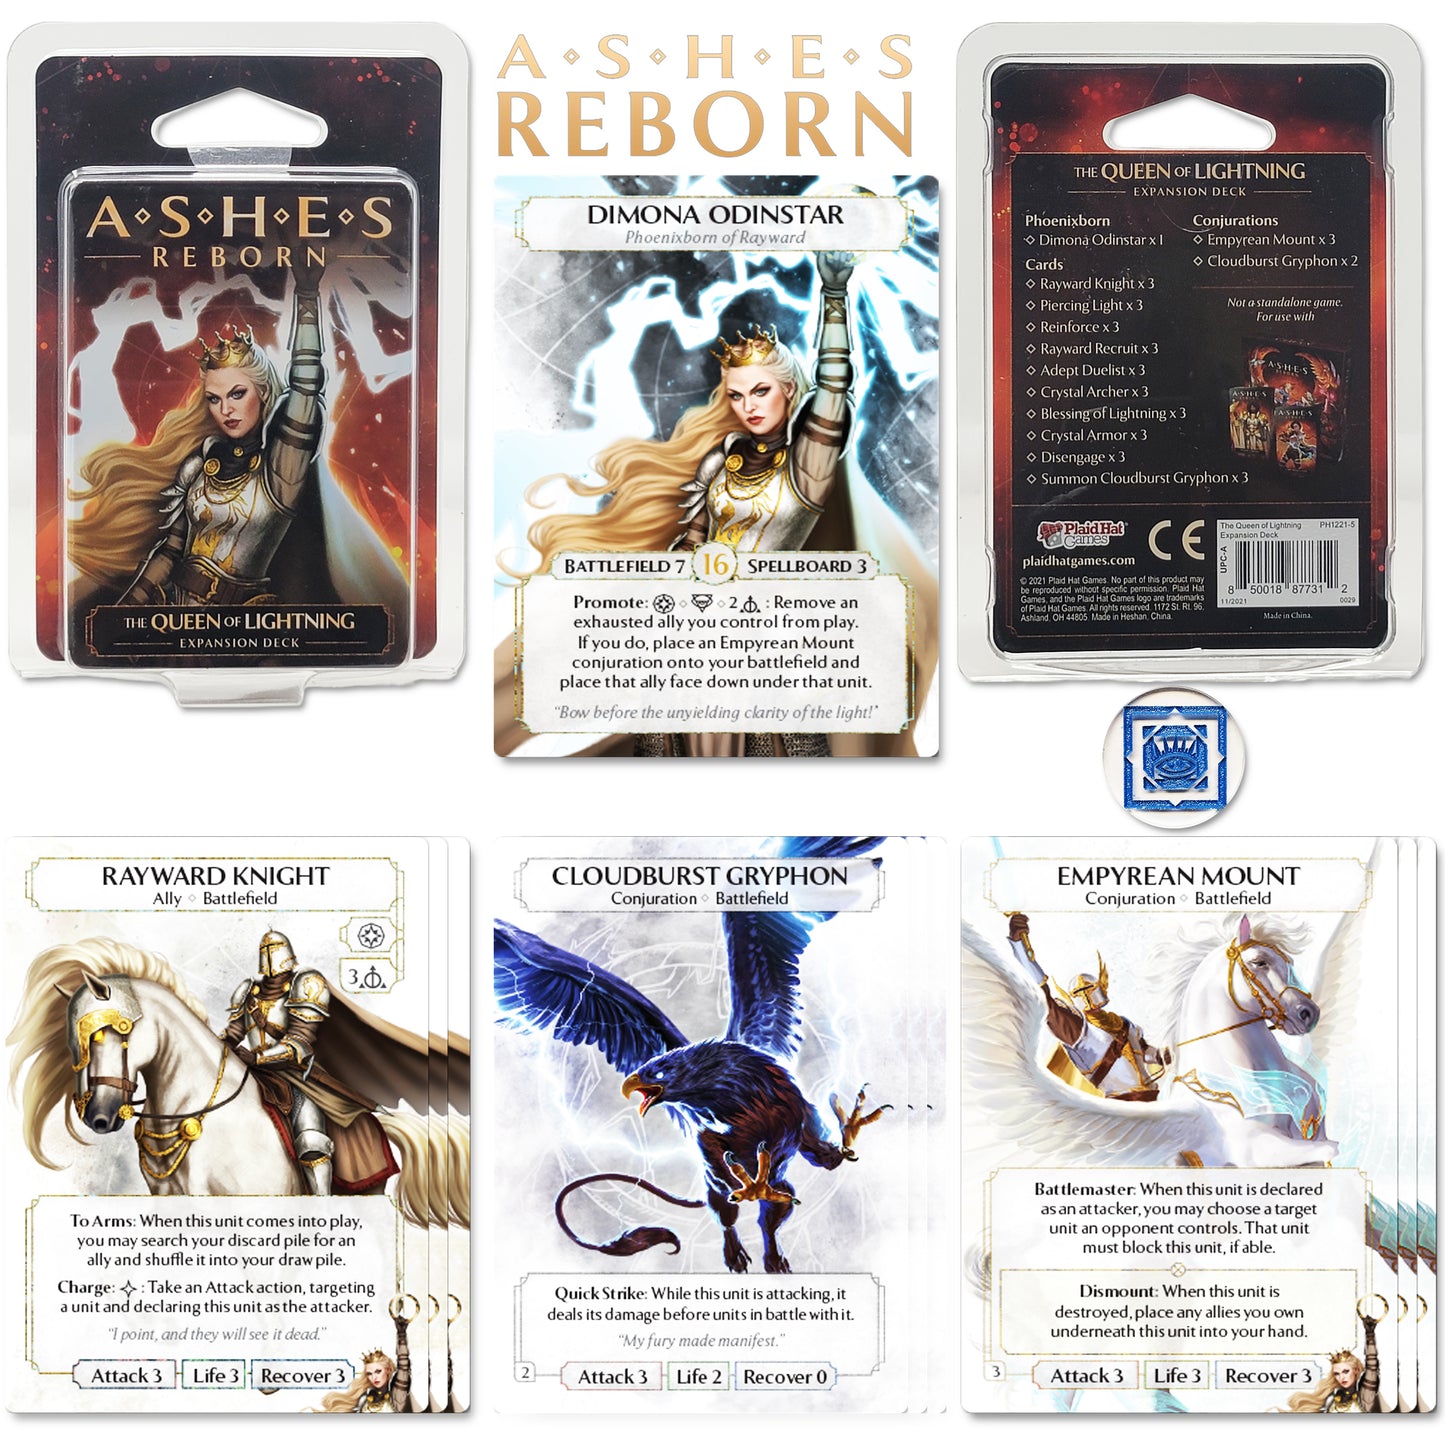 Ashes Reborn The Breaker of Fate Deluxe and Expansions: Artist Dreams,  Messenger Peace,  Queen Lightning & Gorrenrock COMPATIBLES with Ashes Reborn Bundle with Random Color Drawstring Bag plus token